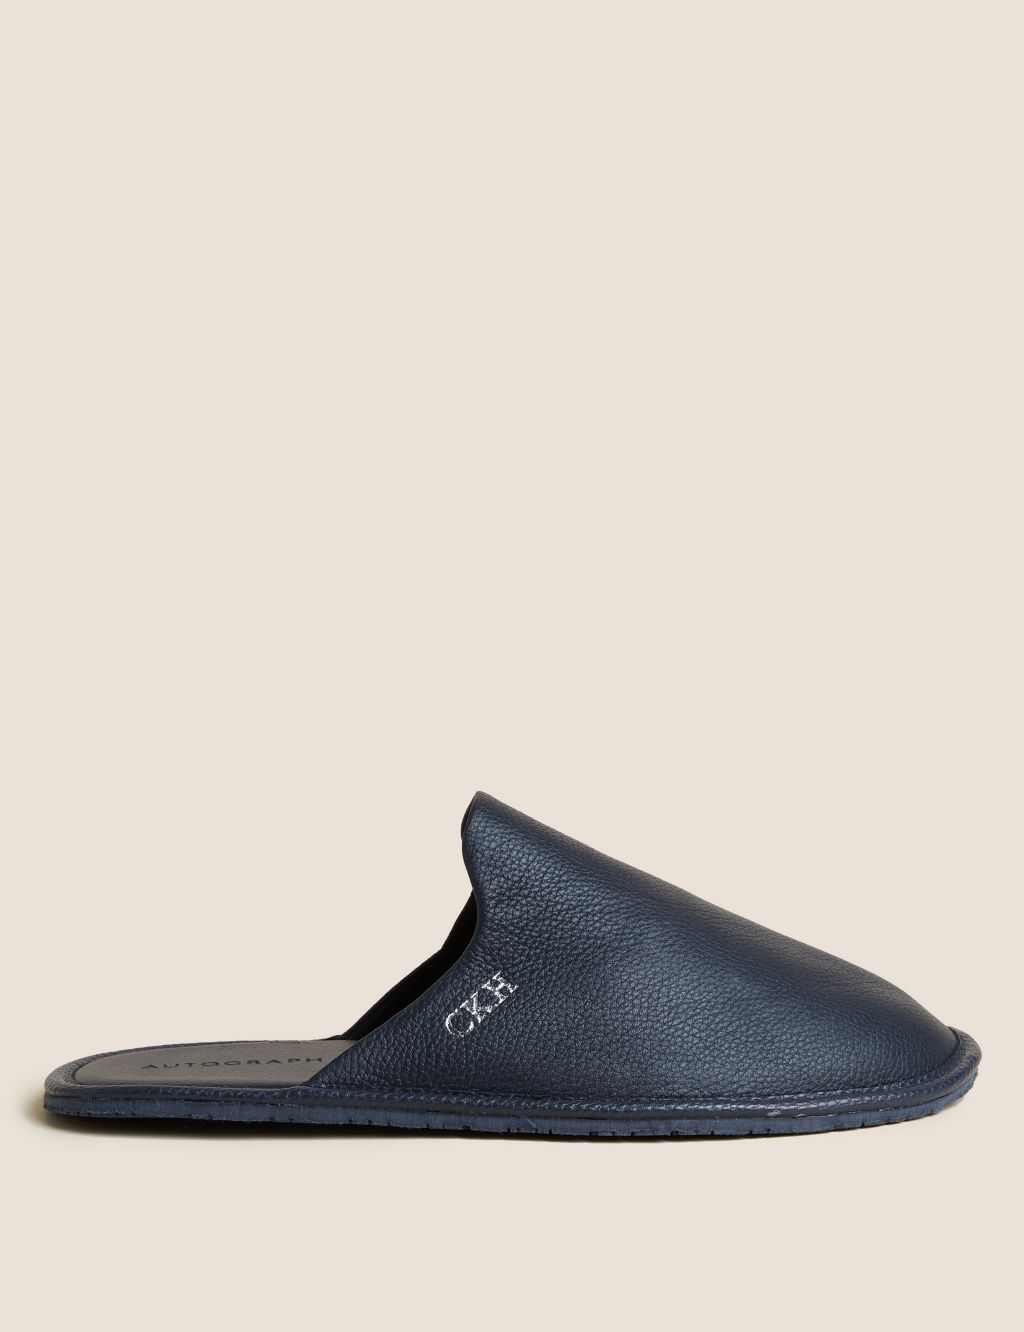 Personalised Men's Leather Mule Slippers